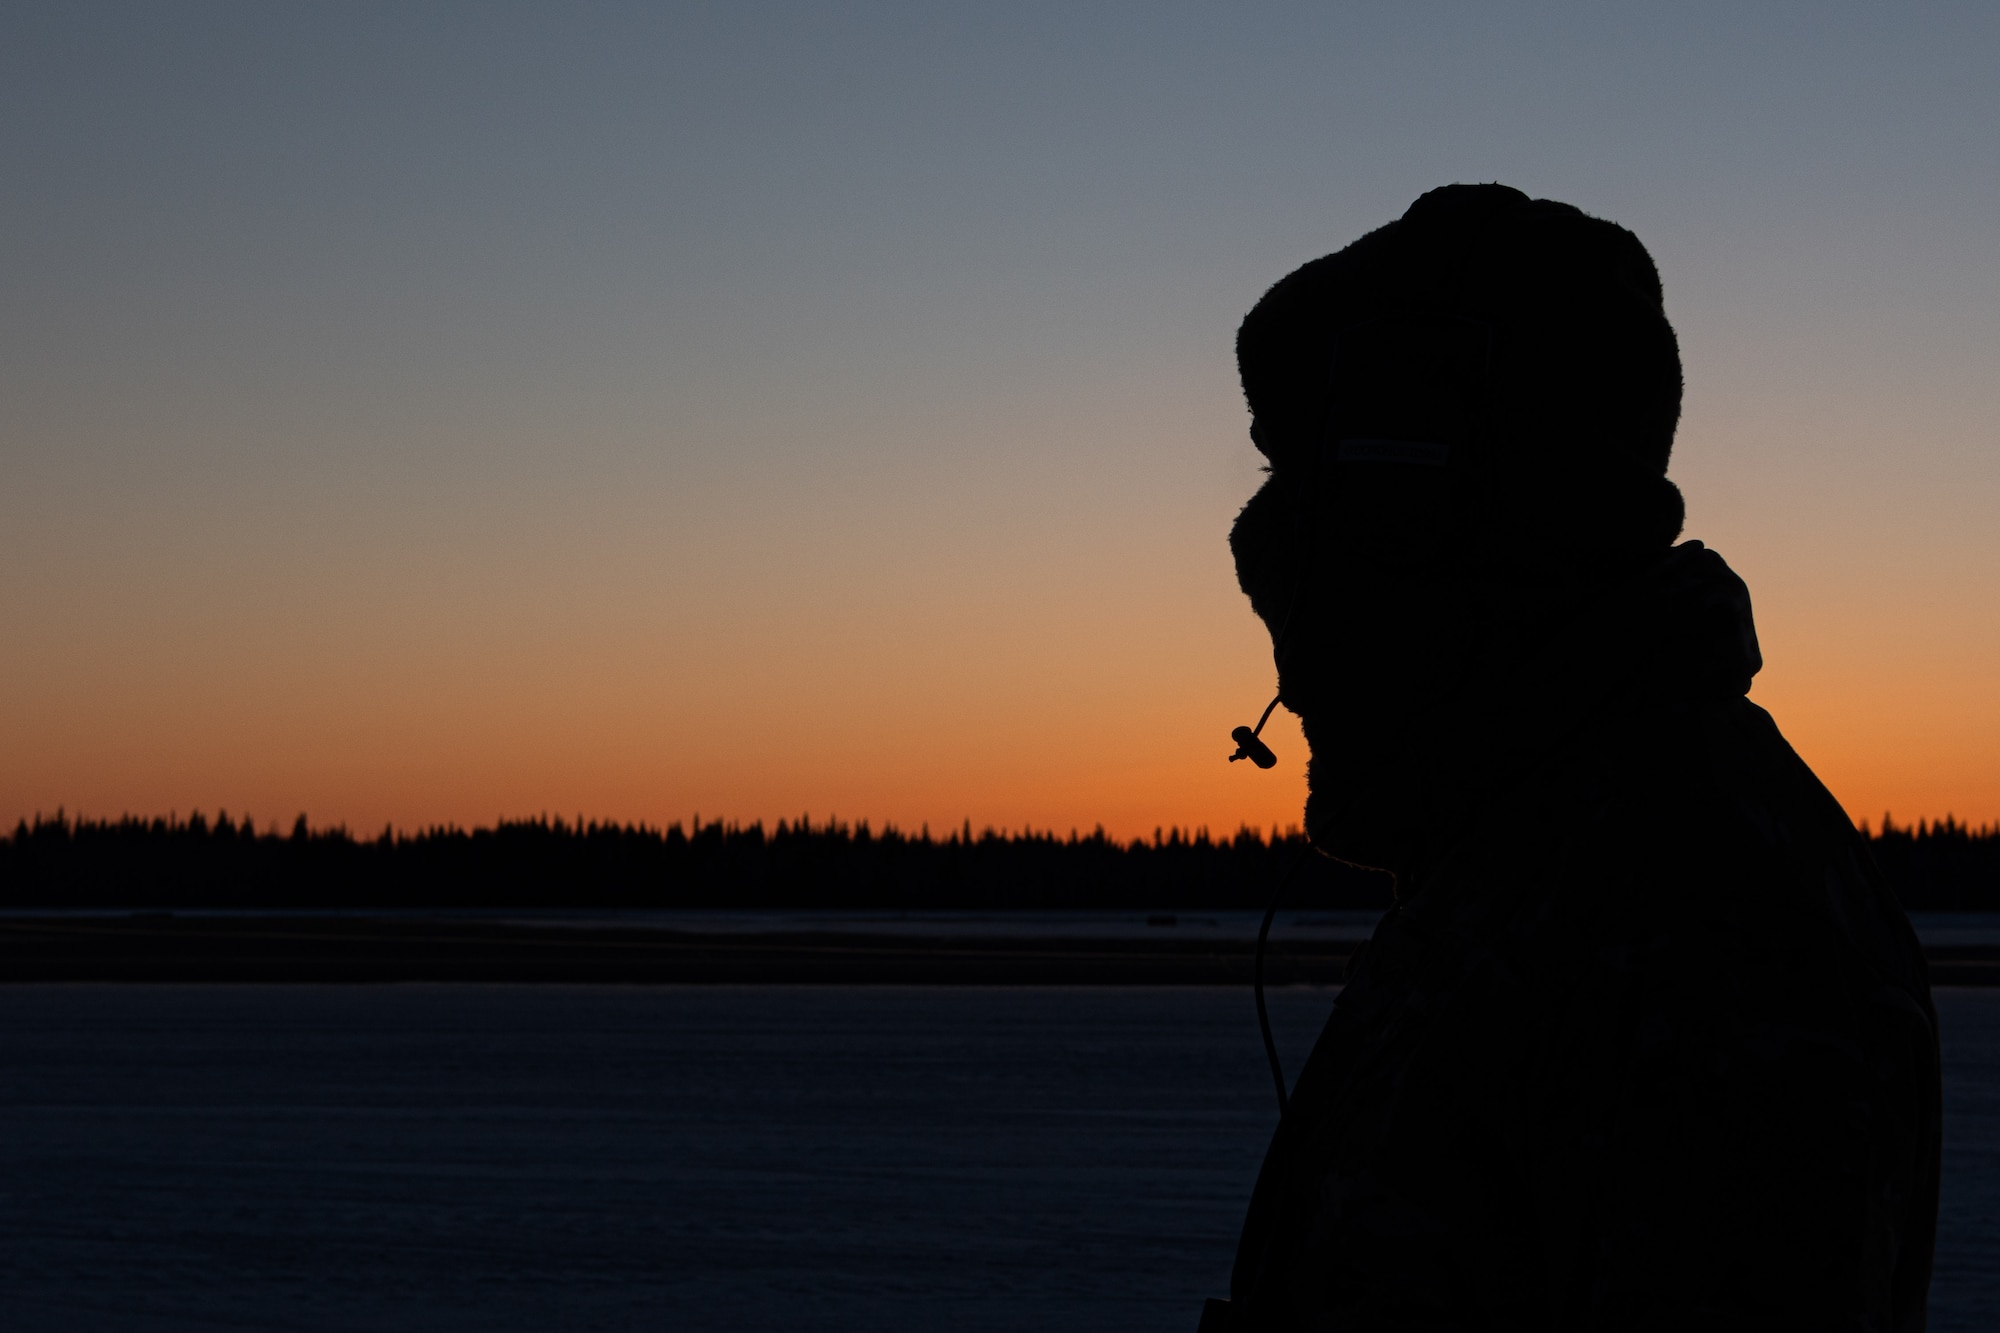 A U.S. Airman assigned to the 27th Special Operations Wing checks the rear of a MC-130J Commando II at sunset during Arctic Edge 24 in Fairbanks, Alaska, Feb. 29, 2024. AE24 is an annual defense exercise for the U.S. Northern Command emphasizing Joint Force operations in an extreme cold weather and high latitude environment and is designed to demonstrate Globally Integrated Layered Defense in the Arctic. (U.S. Air Force photo by Senior Airman Drew Cyburt)